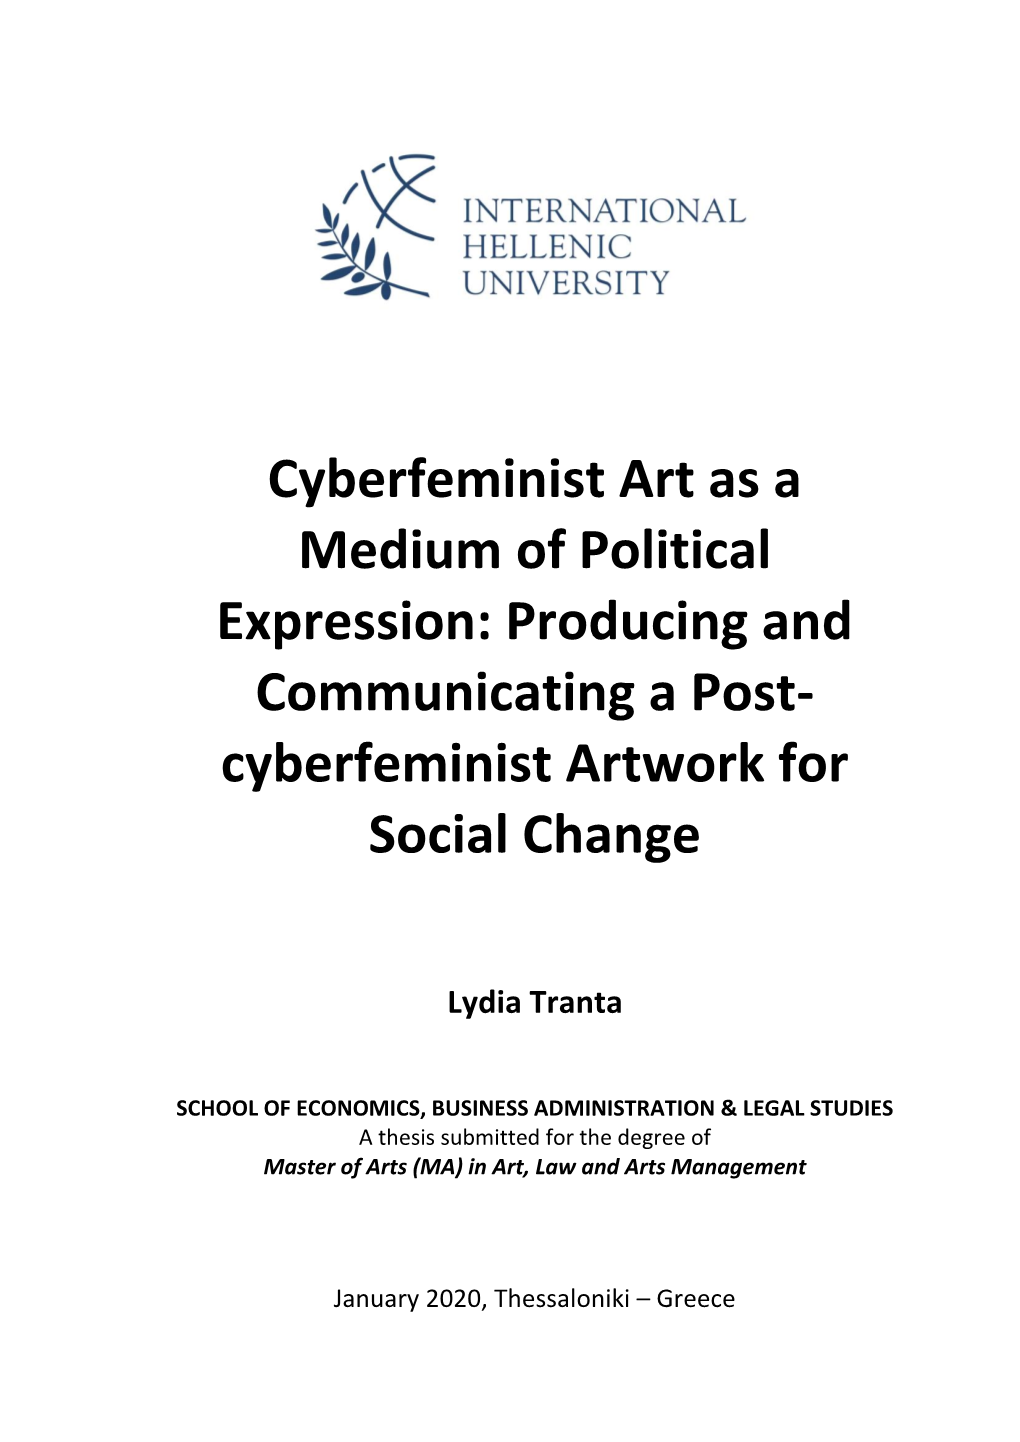 Cyberfeminist Art As a Medium of Political Expression: Producing and Communicating a Post- Cyberfeminist Artwork for Social Change